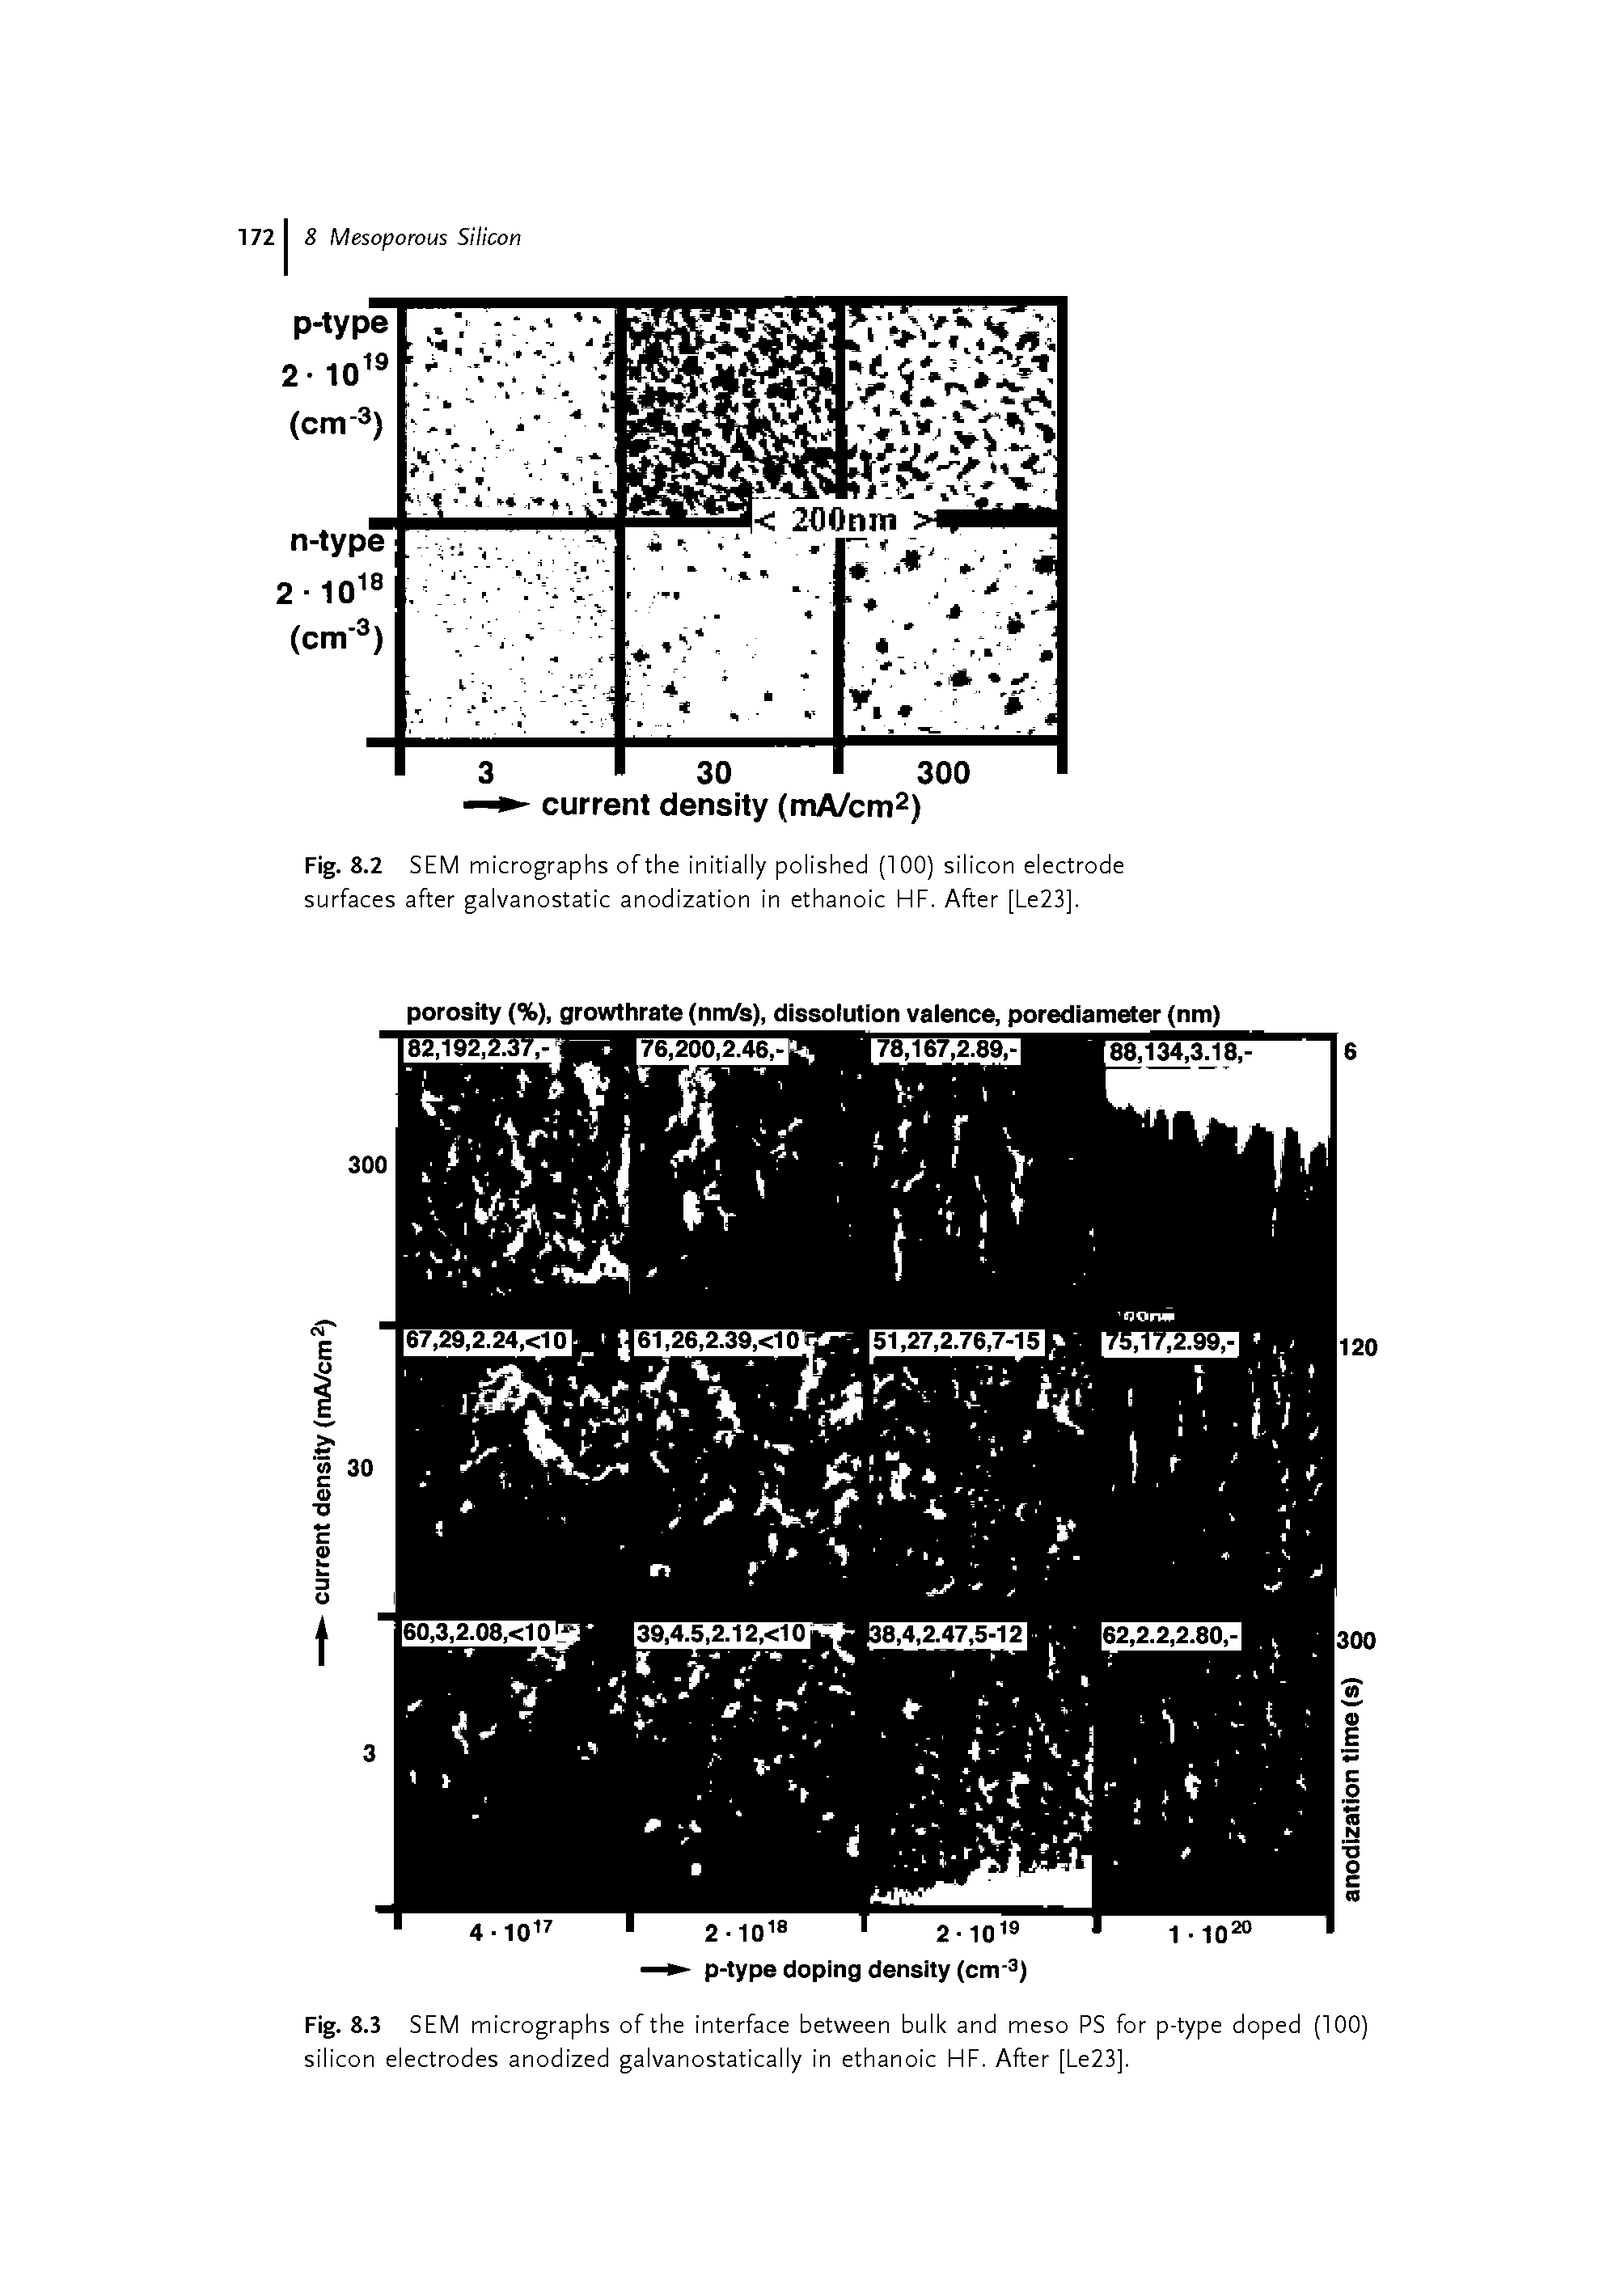 Fig. 8.2 SEM micrographs of the initially polished (100) silicon electrode surfaces after galvanostatic anodization in ethanoic HF. After [Le23].